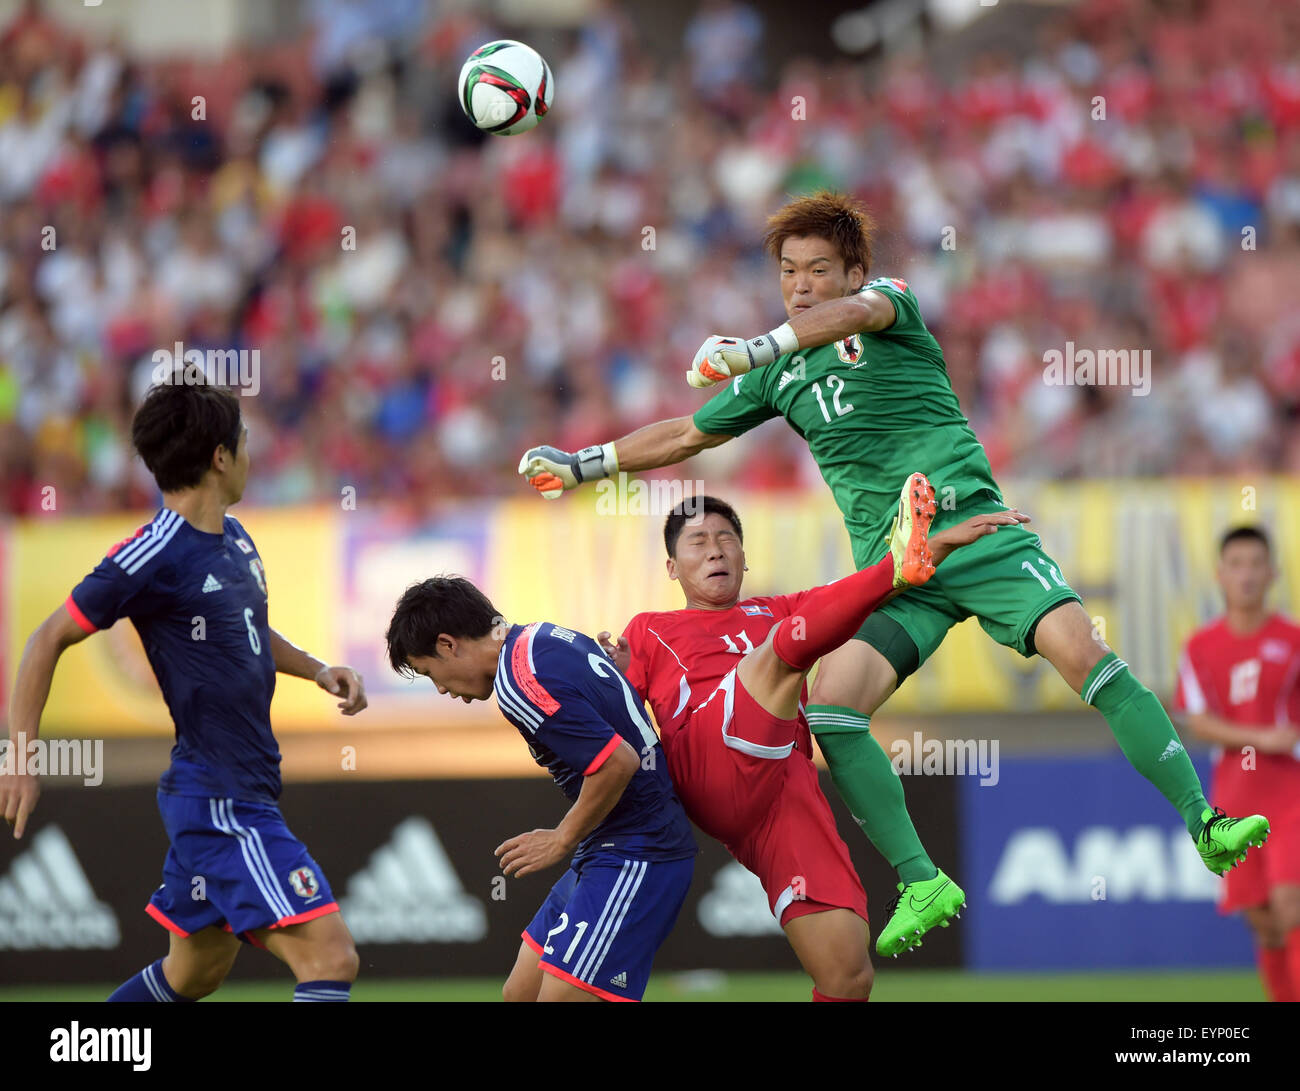 Wuhan, China's Hubei Province. 2nd Aug, 2015. Japan's goalkeeper Nishikawa Shusaku (Top) vies with Jong Il Gwan (2nd R) of the Democratic People's Republic of Korea (DPRK) during their match at the 2015 EAFF(East Asian Football Federation) East Asian Cup in Wuhan, capital of central China's Hubei Province, Aug. 2, 2015. DPRK won 2-1. © Cheng Min/Xinhua/Alamy Live News Stock Photo